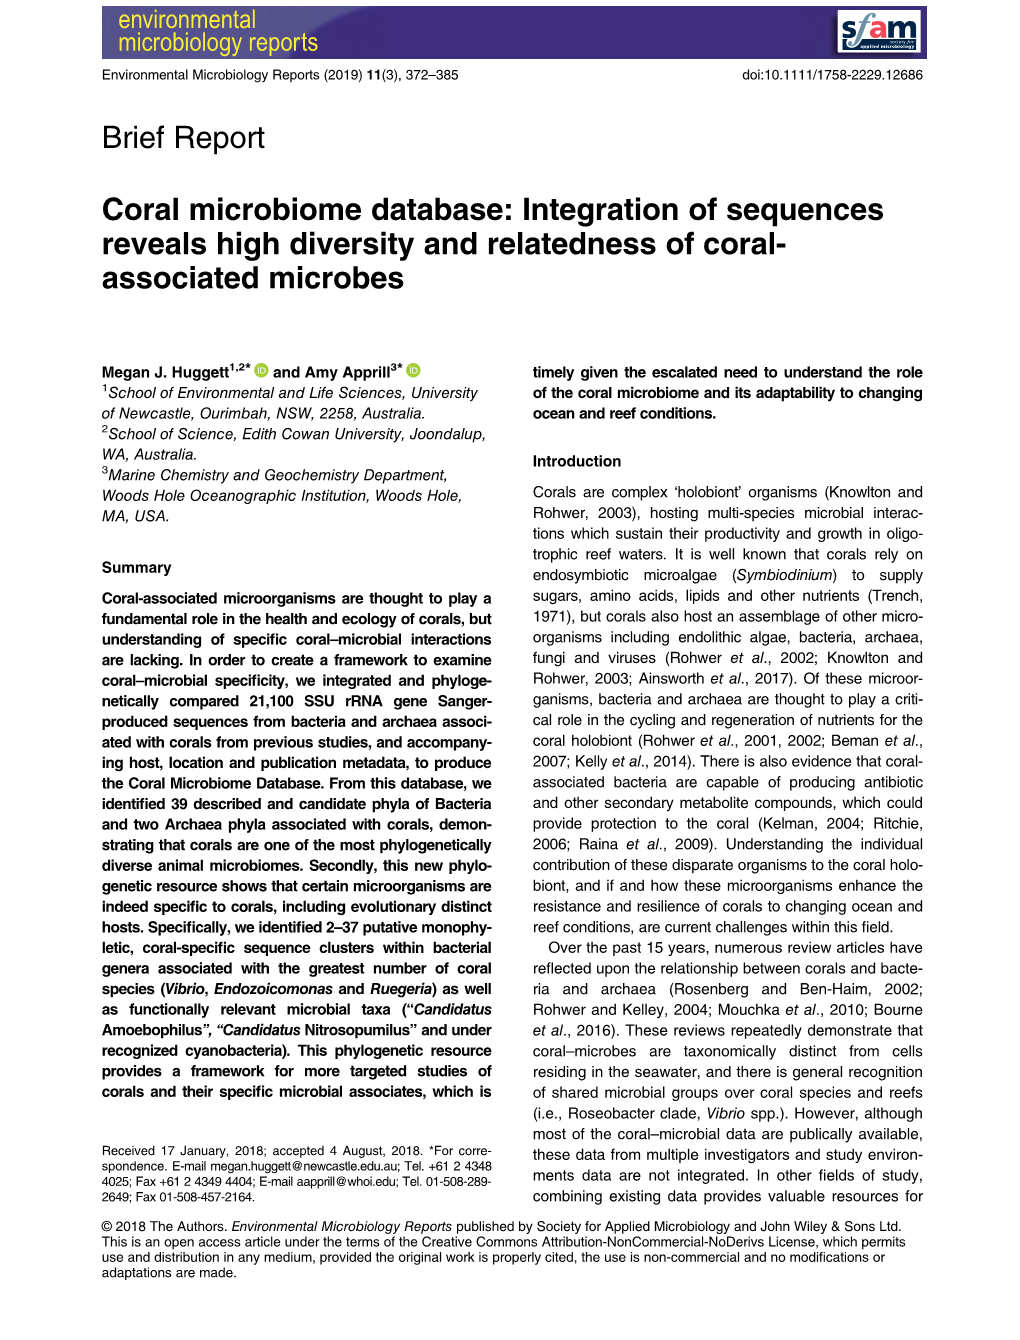 Coral Microbiome Database: Integration of Sequences Reveals High Diversity and Relatedness of Coral- Associated Microbes